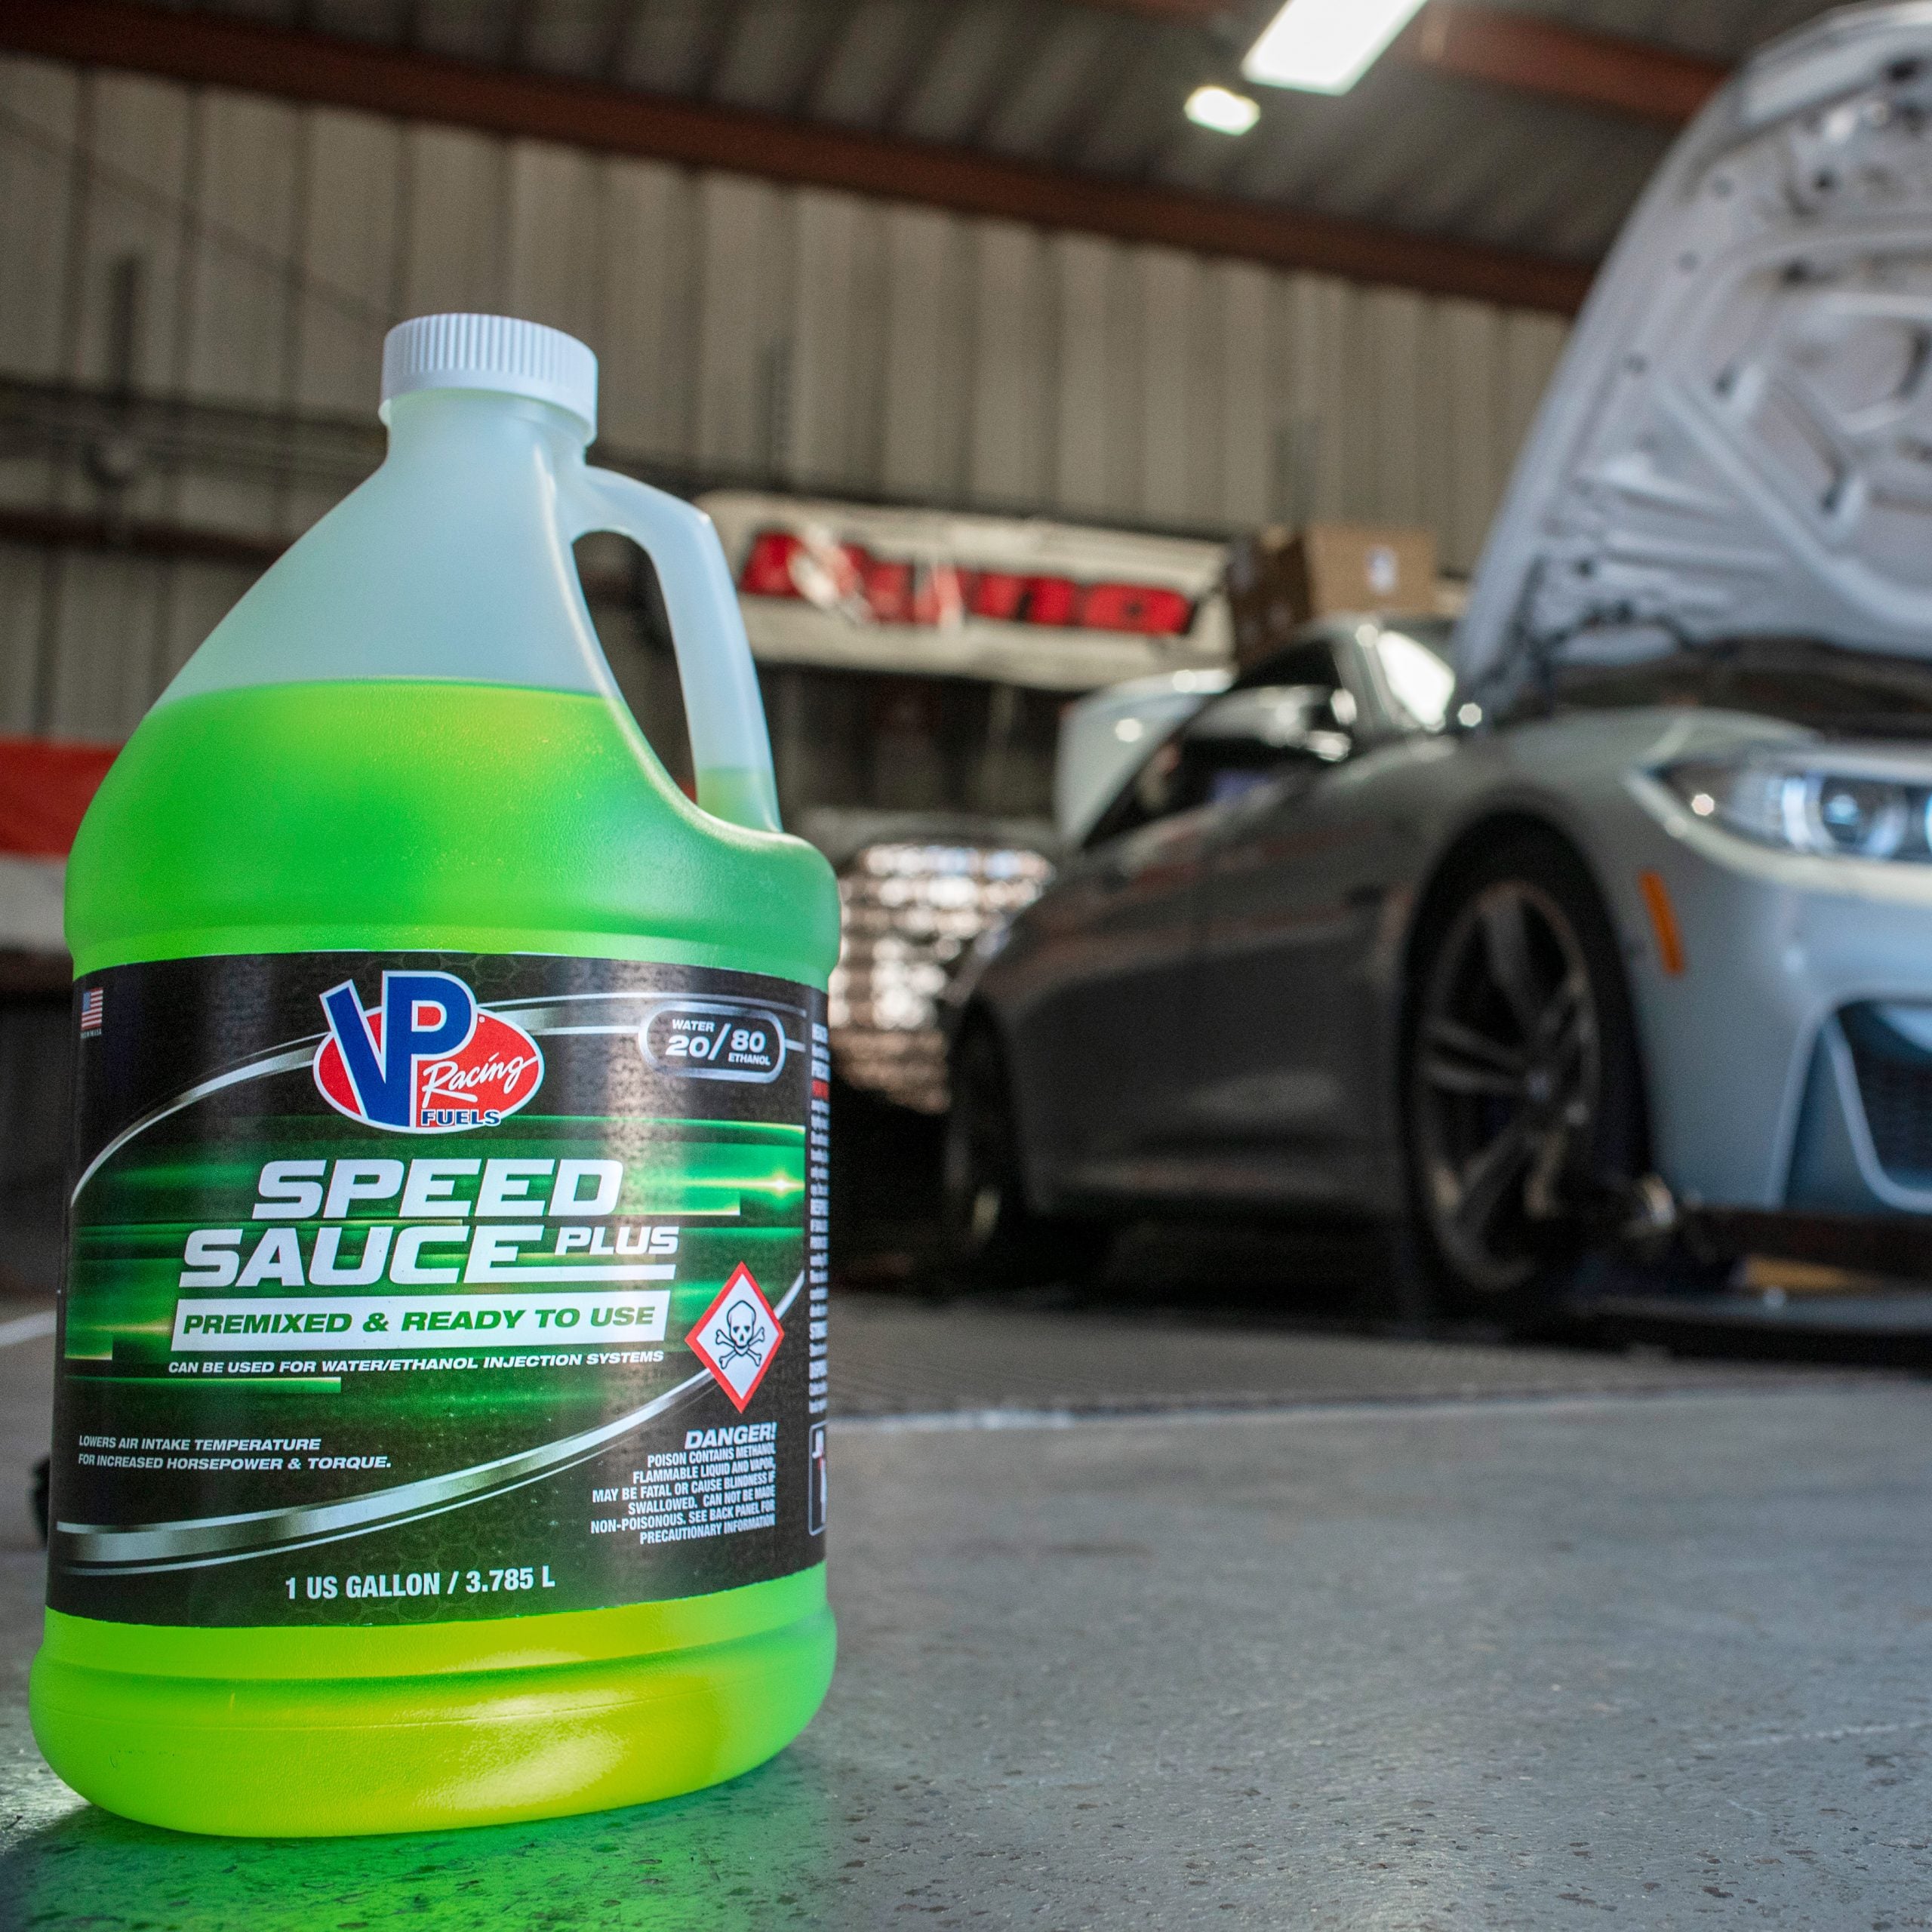 VP Racing Speed Sauce. Water ethanol injection fluid premix. Ready to use out of the bottle. Increases engine torque and power. How to increase engine power? Use VP Racing Speed Sauce in your water injection kits. Perfect for highly boosted cars